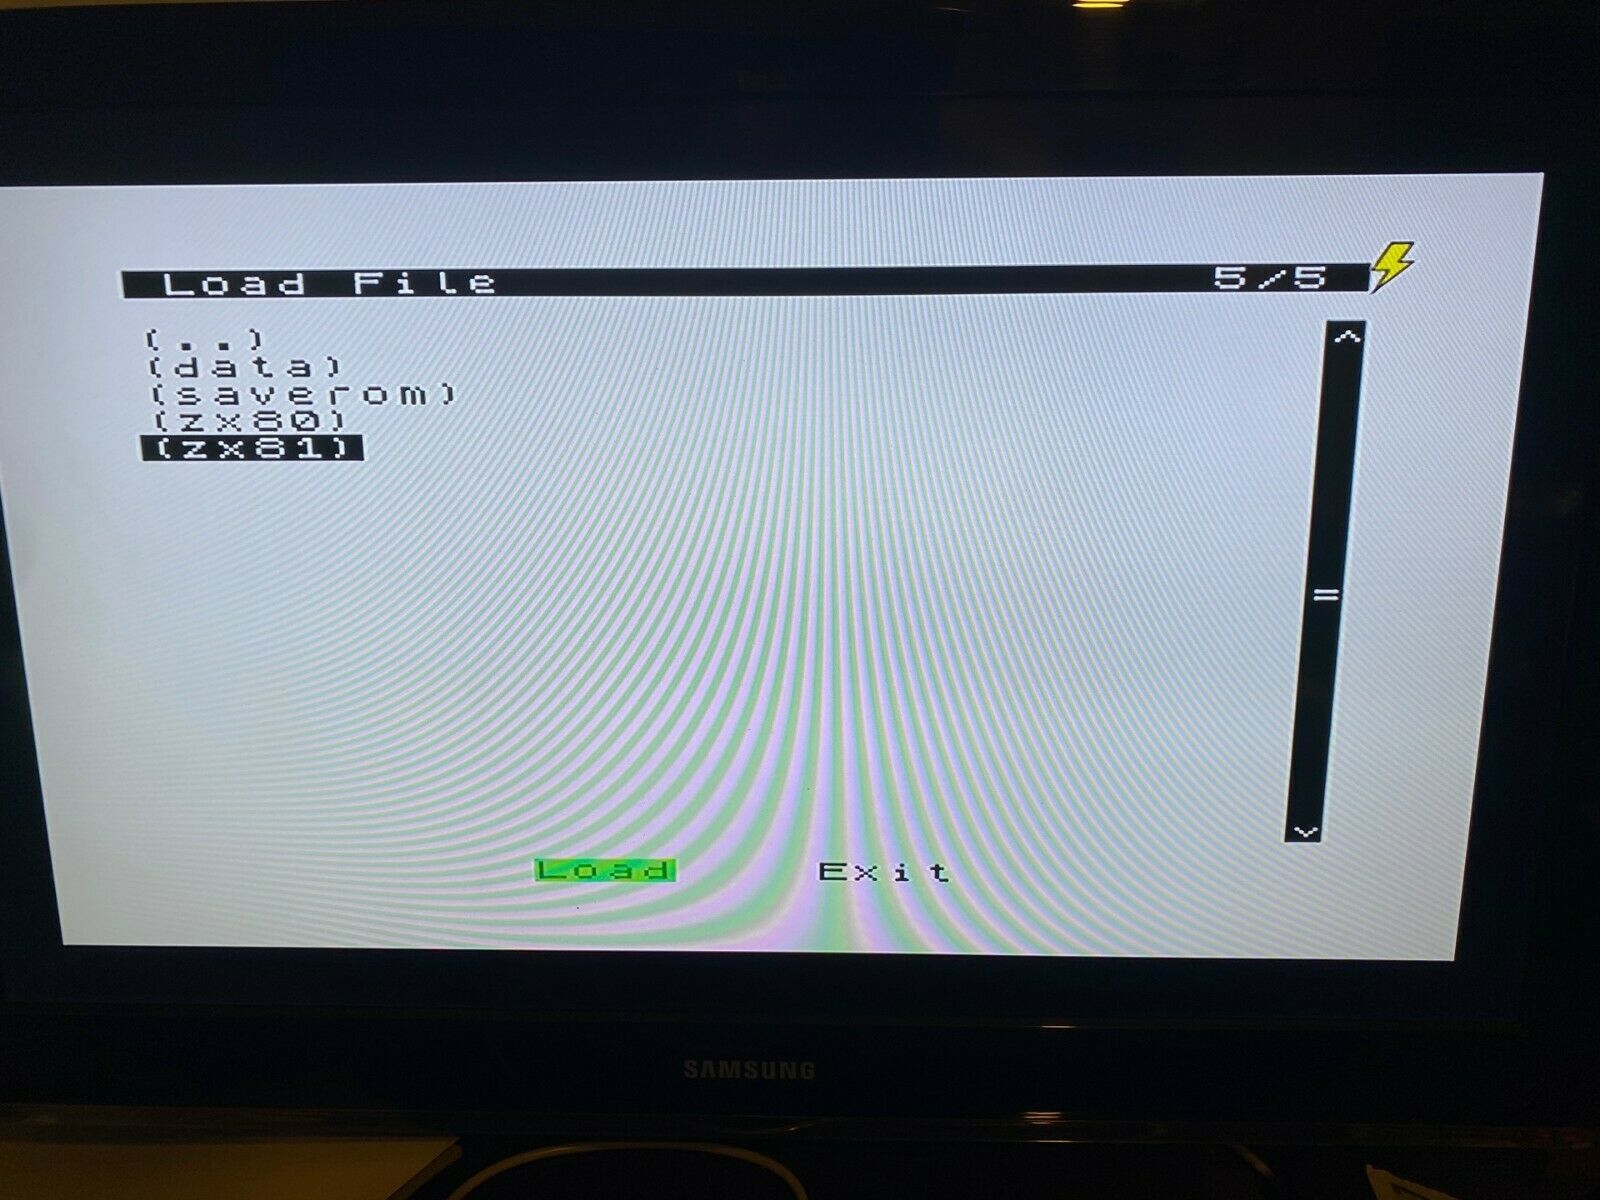 Sinclair ZX 81 emulator for raspberry pi with games